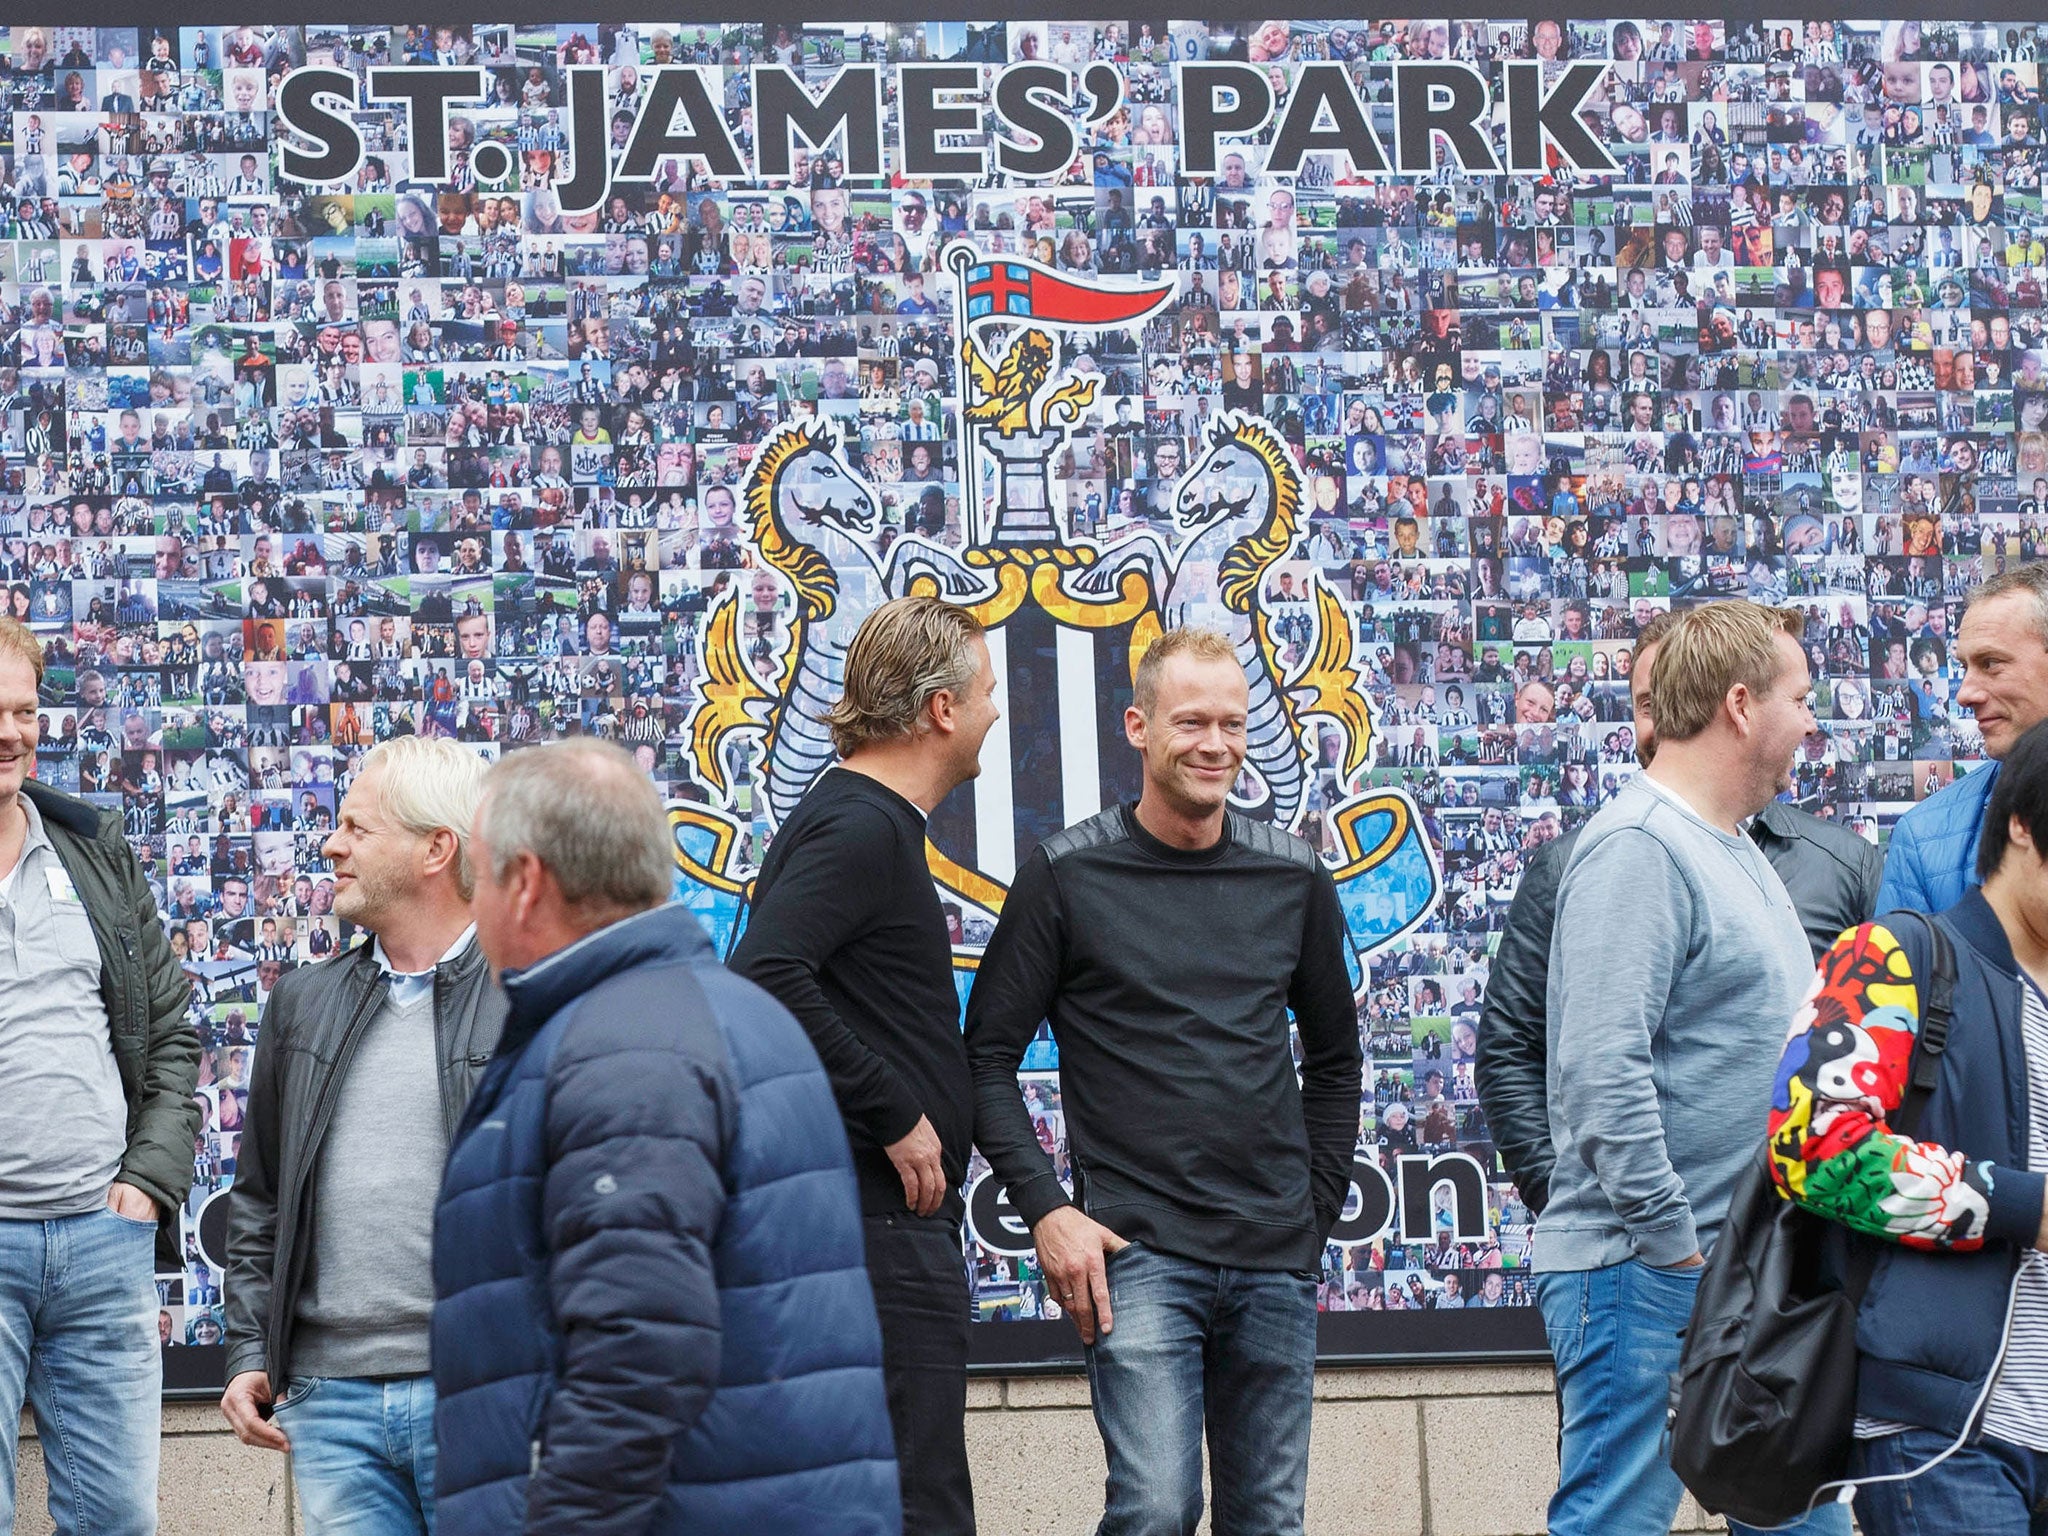 A view outside Newcastle's St James' Park